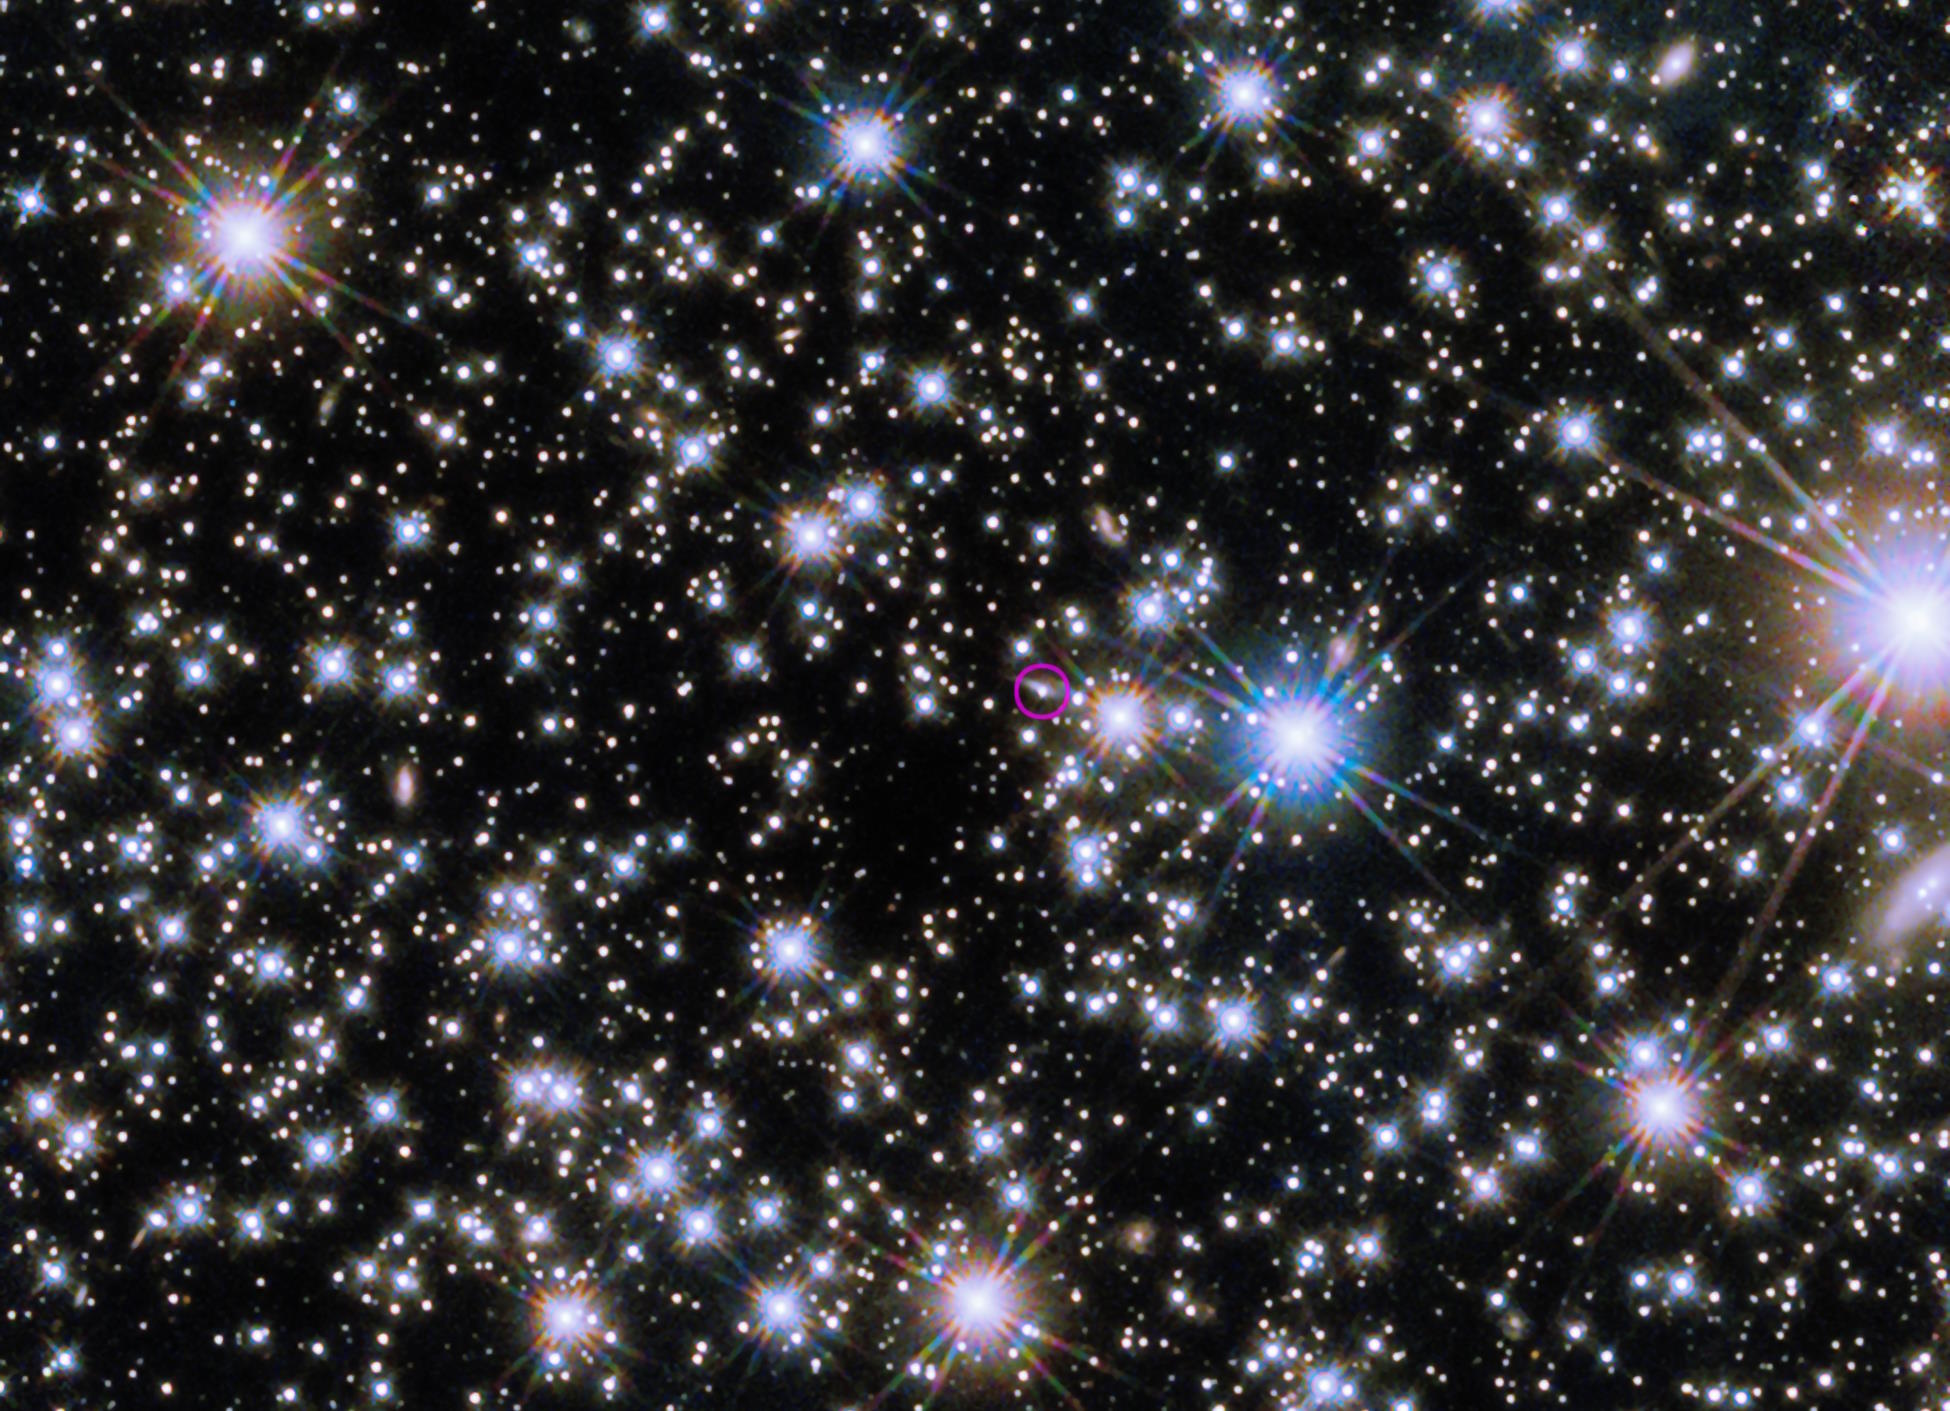 Hubble view of galaxy containing GRB 221009A BOAT